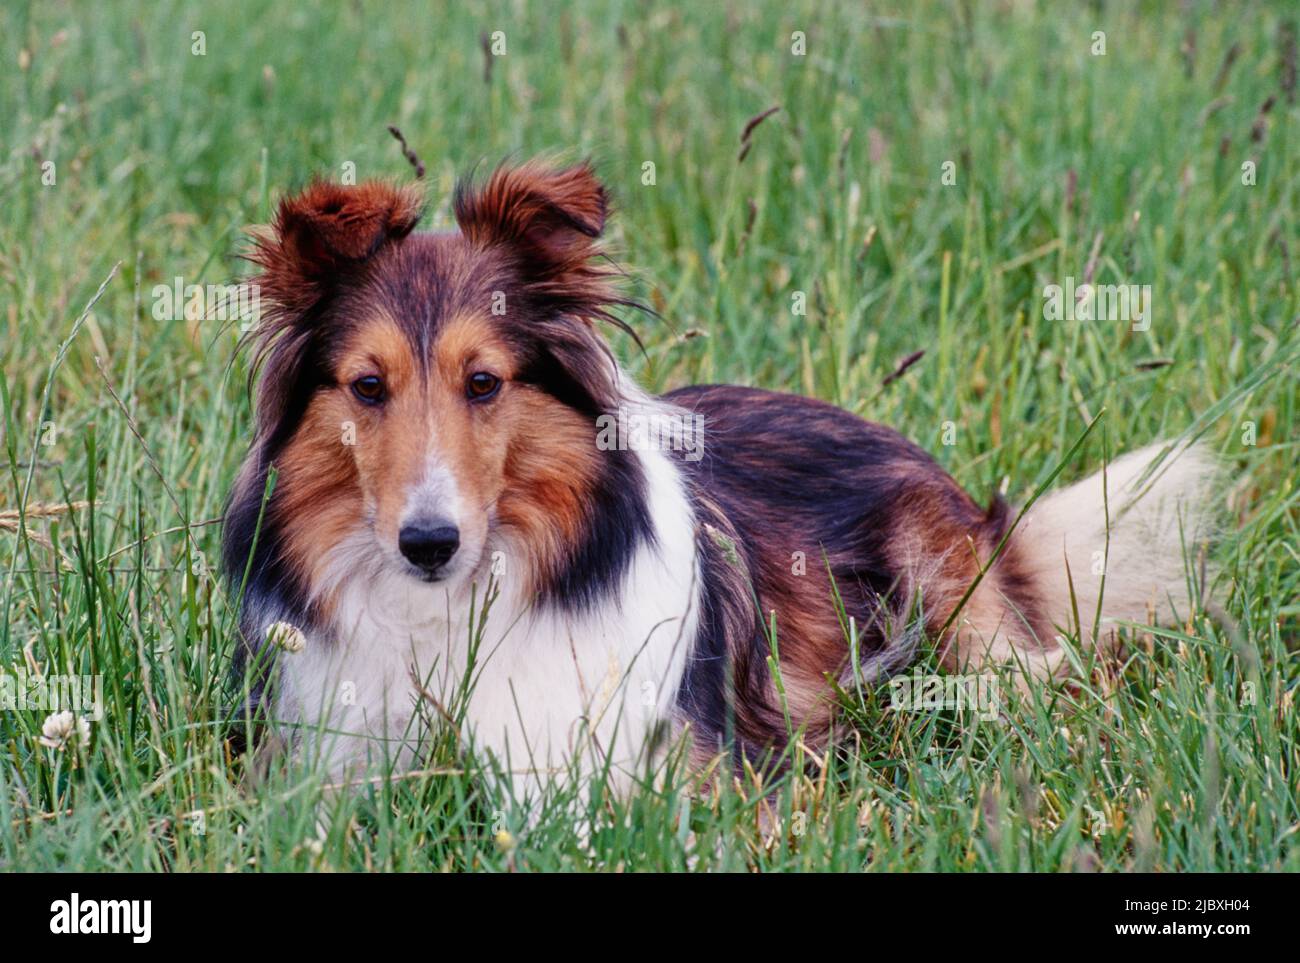 A sheltie dog laying in a grassy field Stock Photo